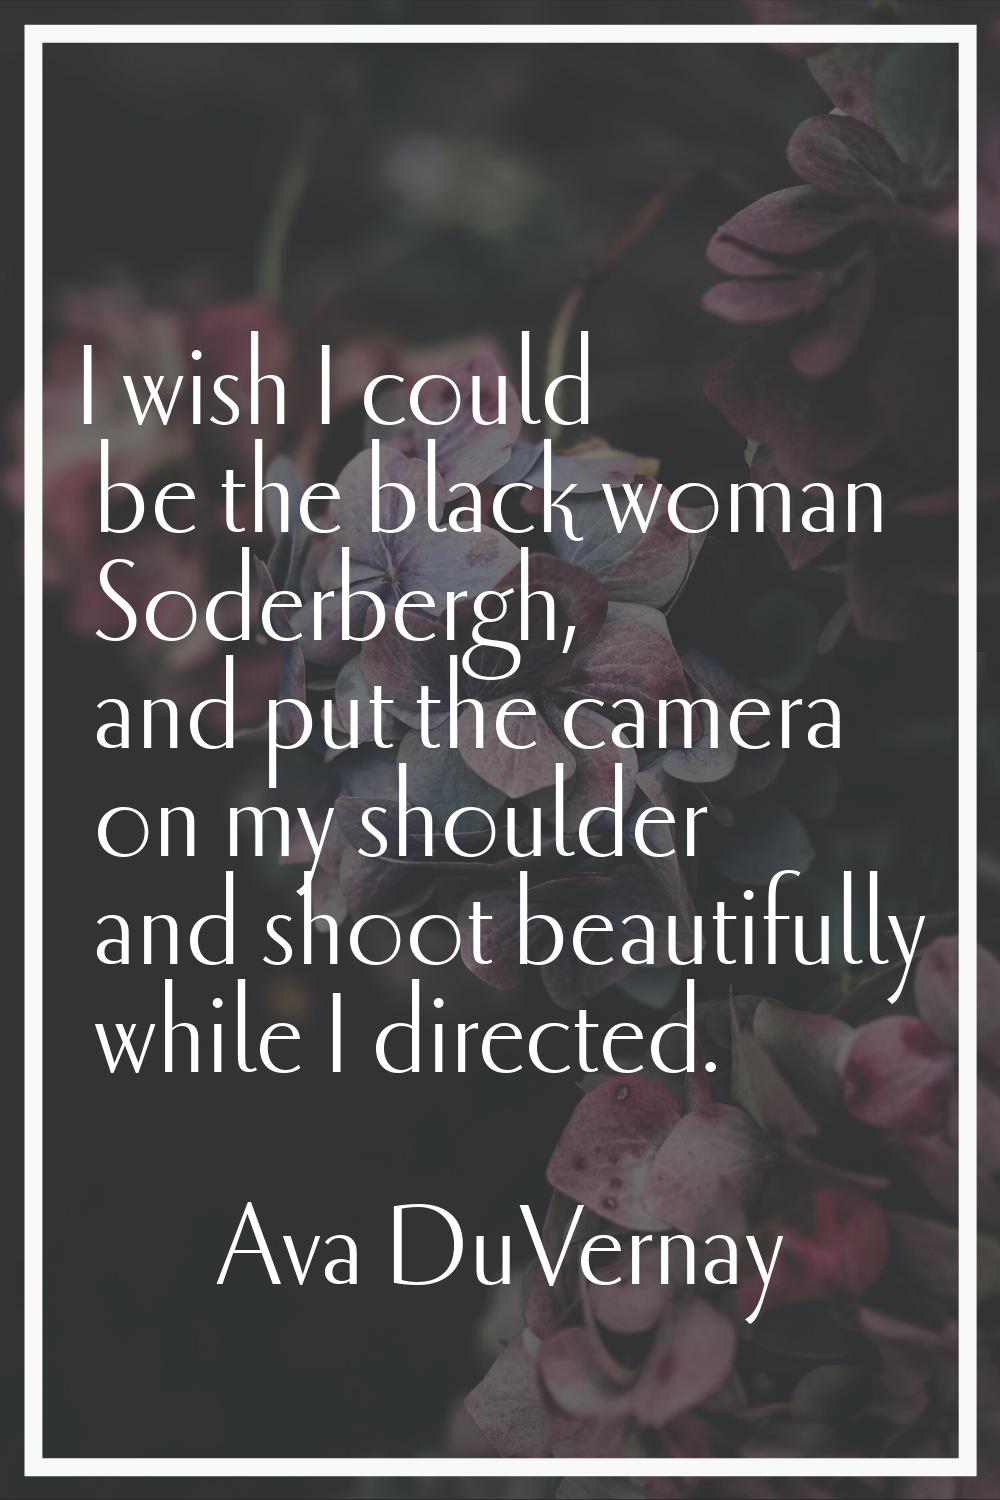 I wish I could be the black woman Soderbergh, and put the camera on my shoulder and shoot beautiful